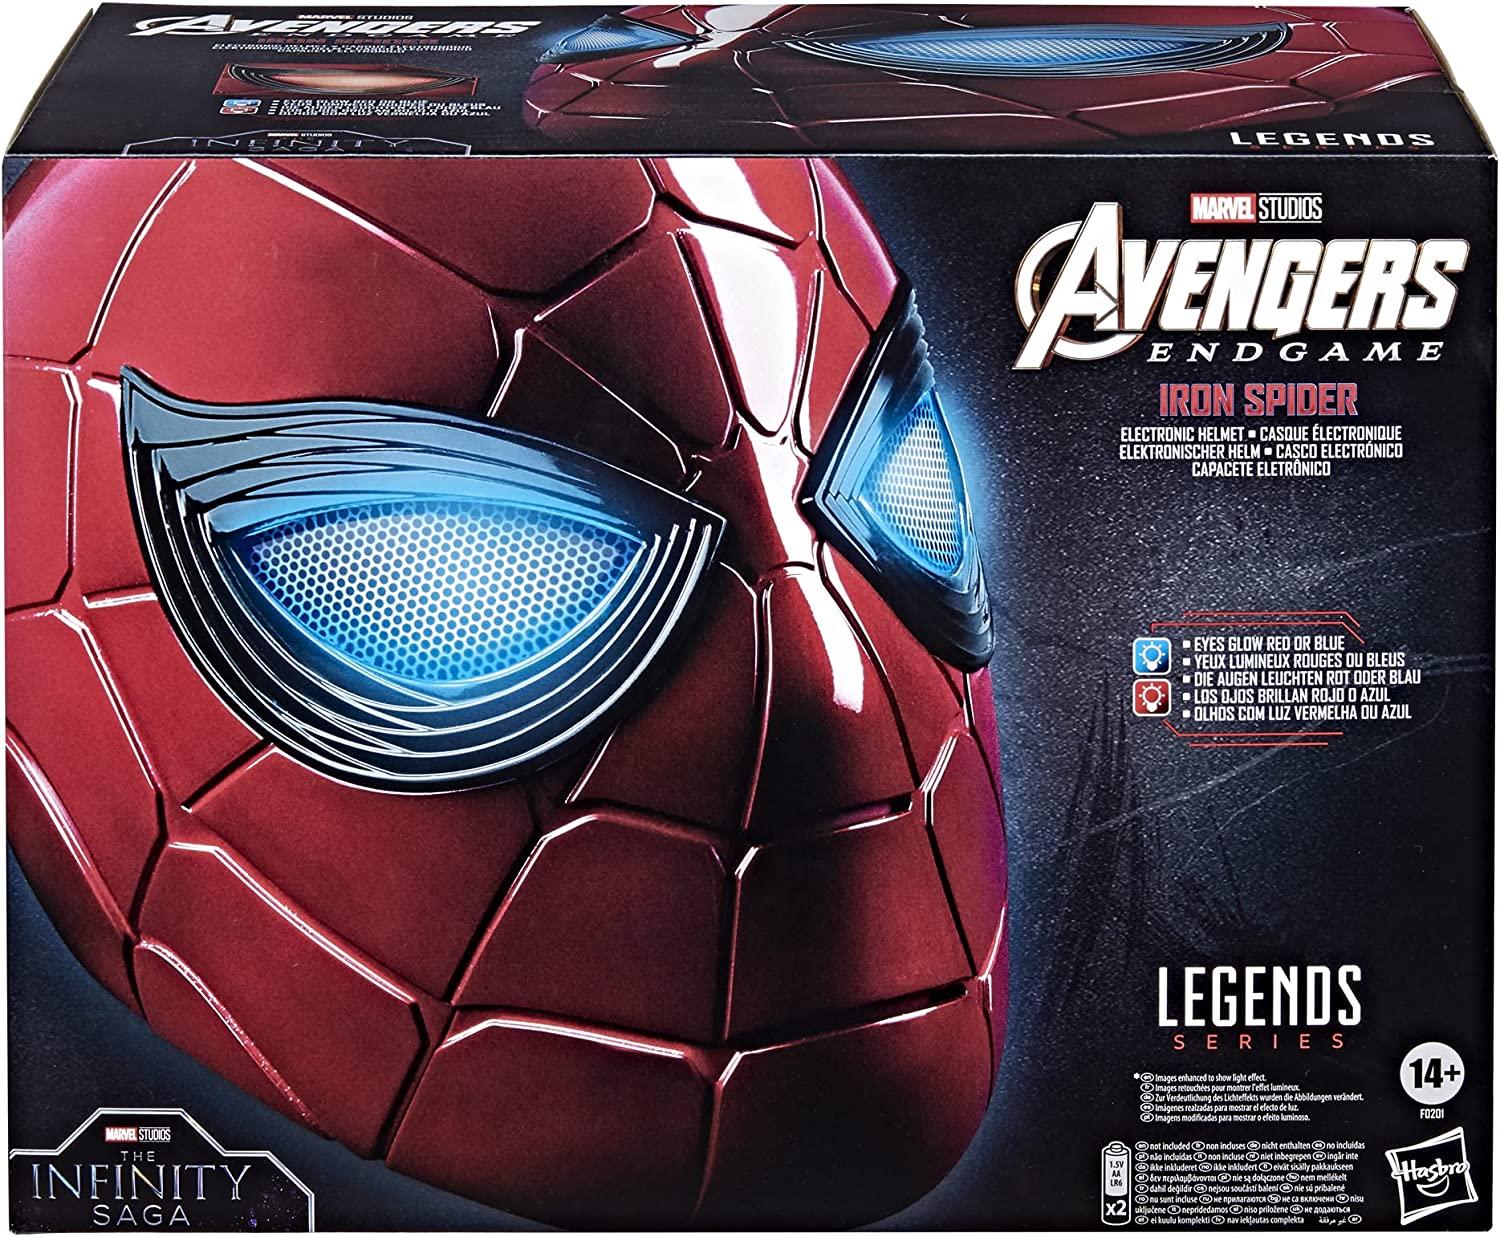 Marvel Legends Iron Spider Spider-Man Electronic Helmet for $75.74 Shipped